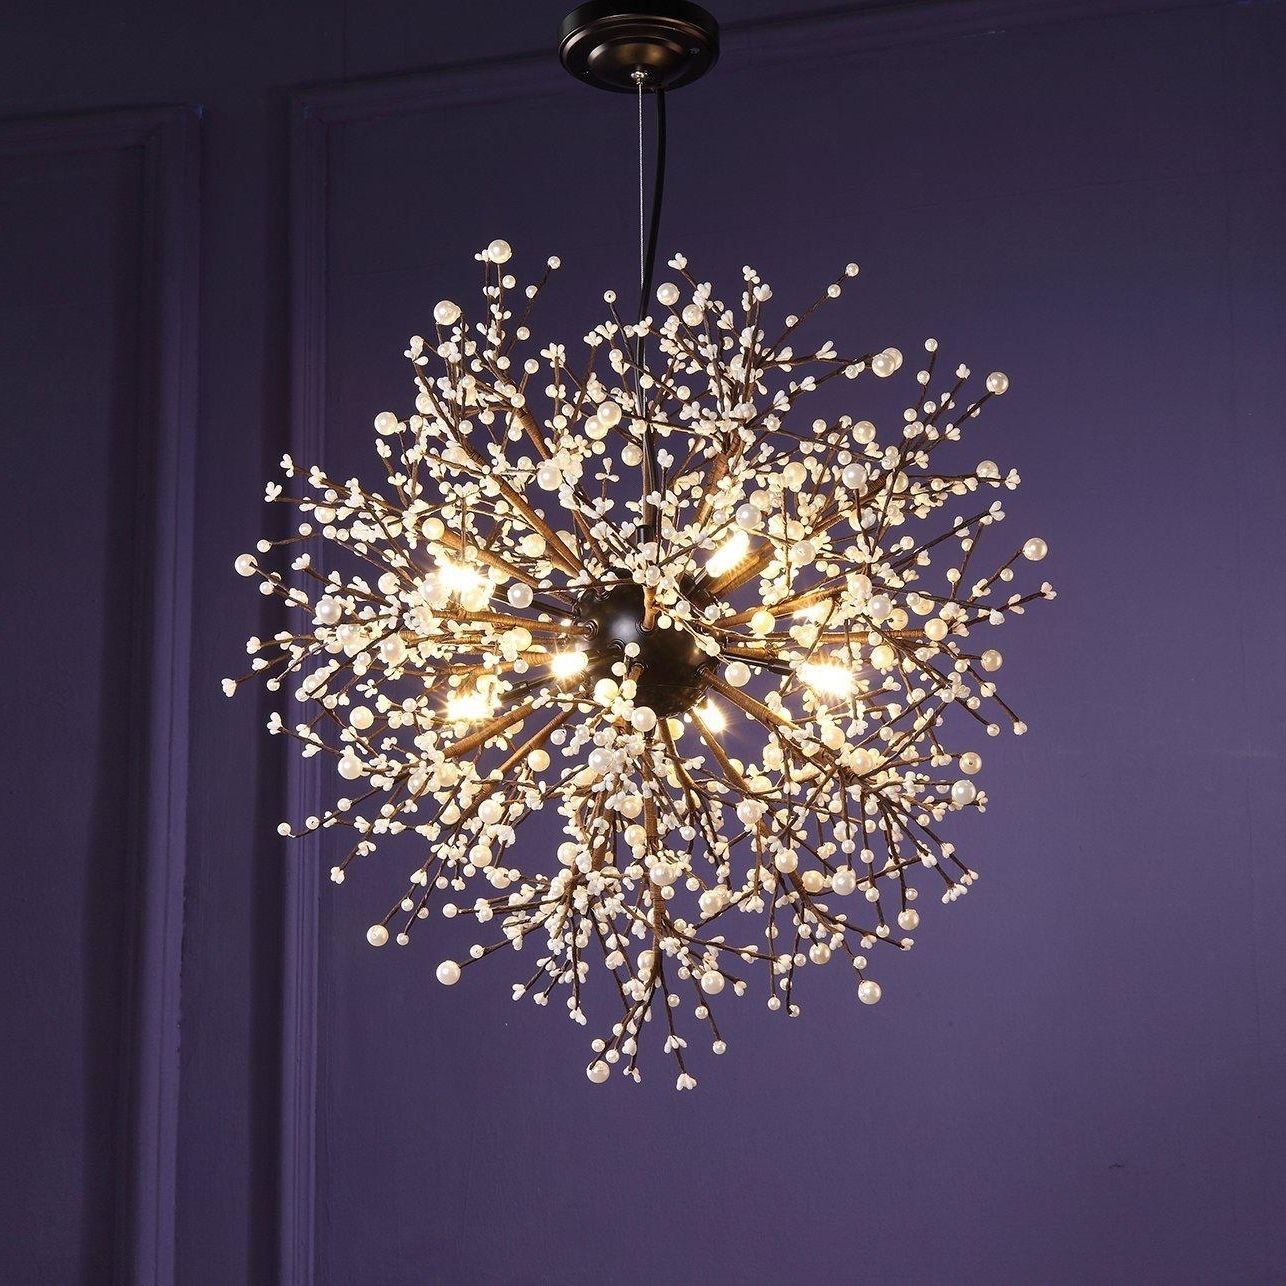 Famous Modern Chandeliers Throughout Modern Chandeliers Firework Led Vintage Wrought Iron Chandelier (View 1 of 20)